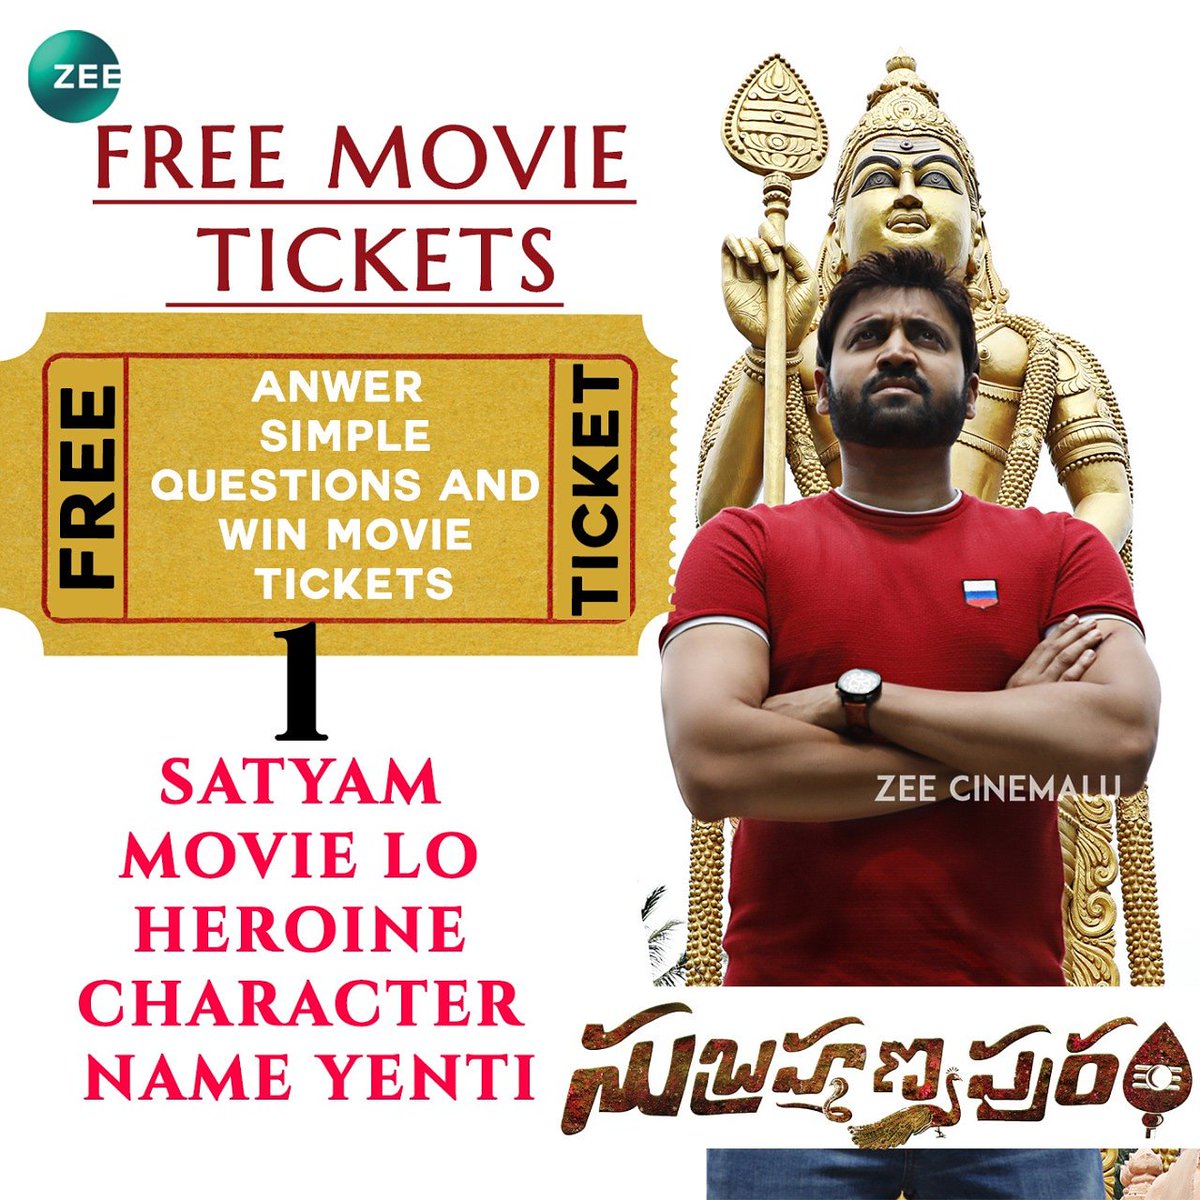 Want to watch #Sumanth and #EeshaRebba 's #Subramanyapuram movie!! 

Then participate in all the questions we ask you today win #FreeTickets🎥

#SubramanyapuramOnDec7th #FirstQuestion #ContestAlert